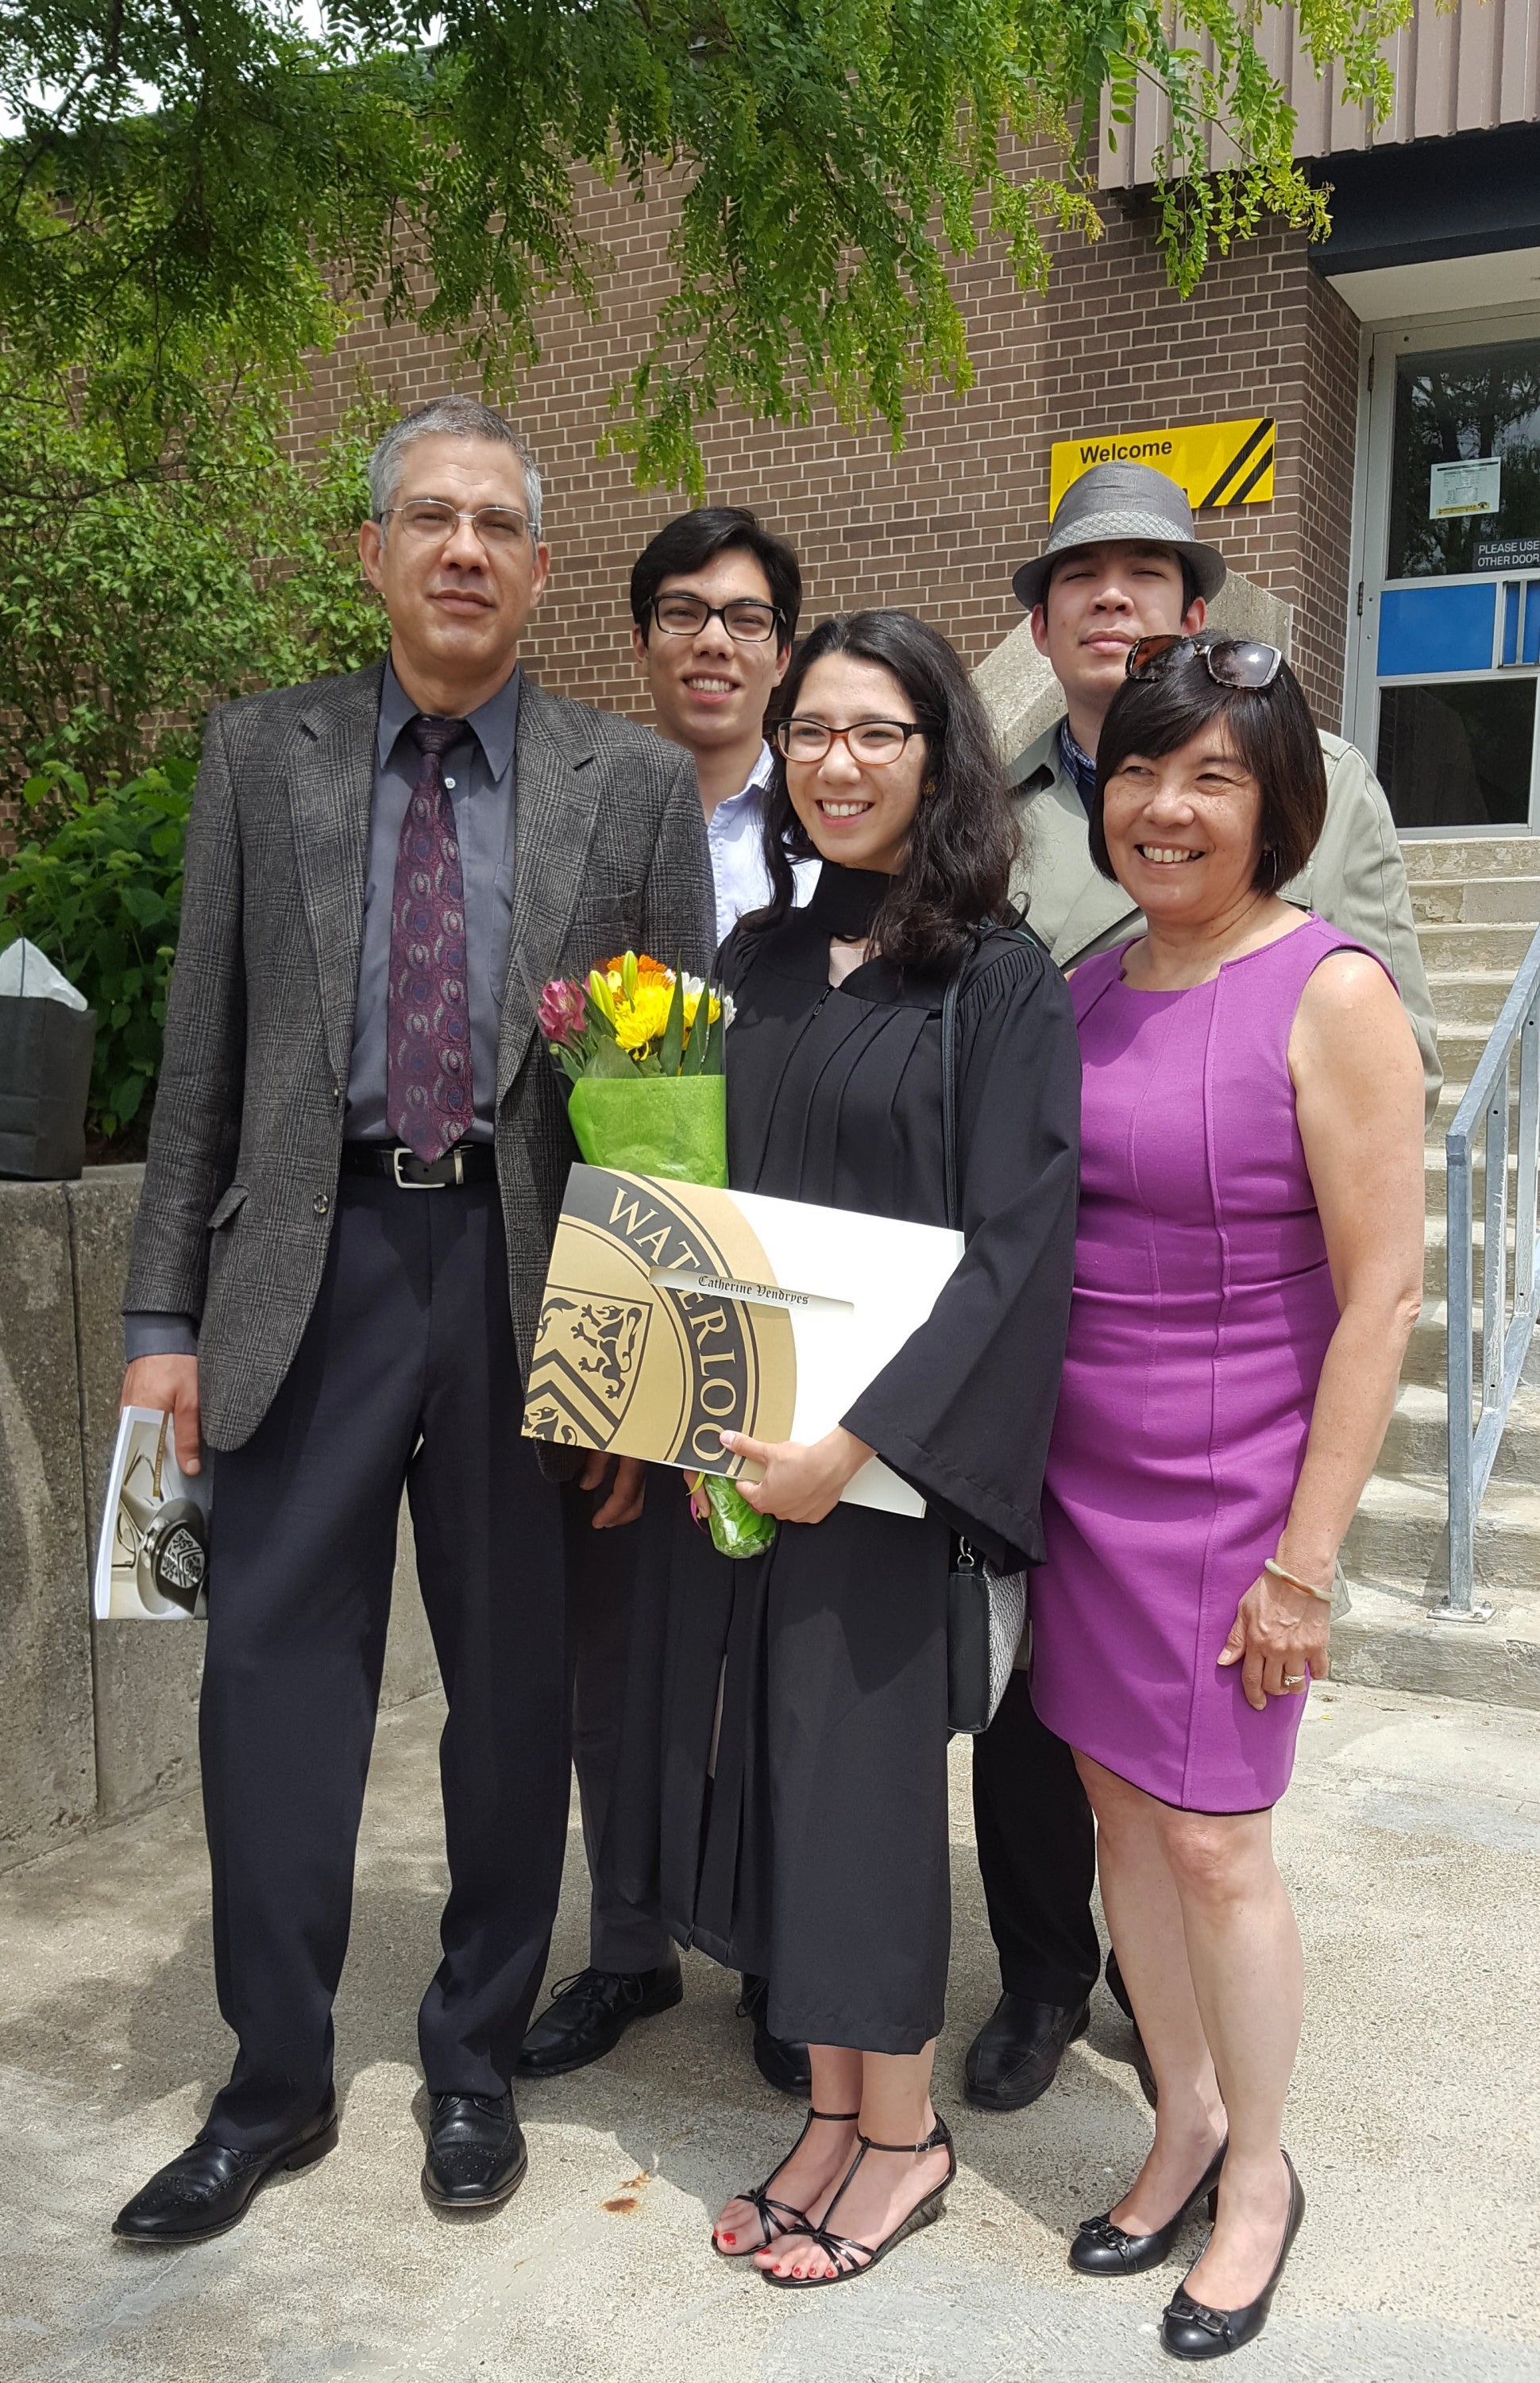 Catherine in graduation robes with her smiling family